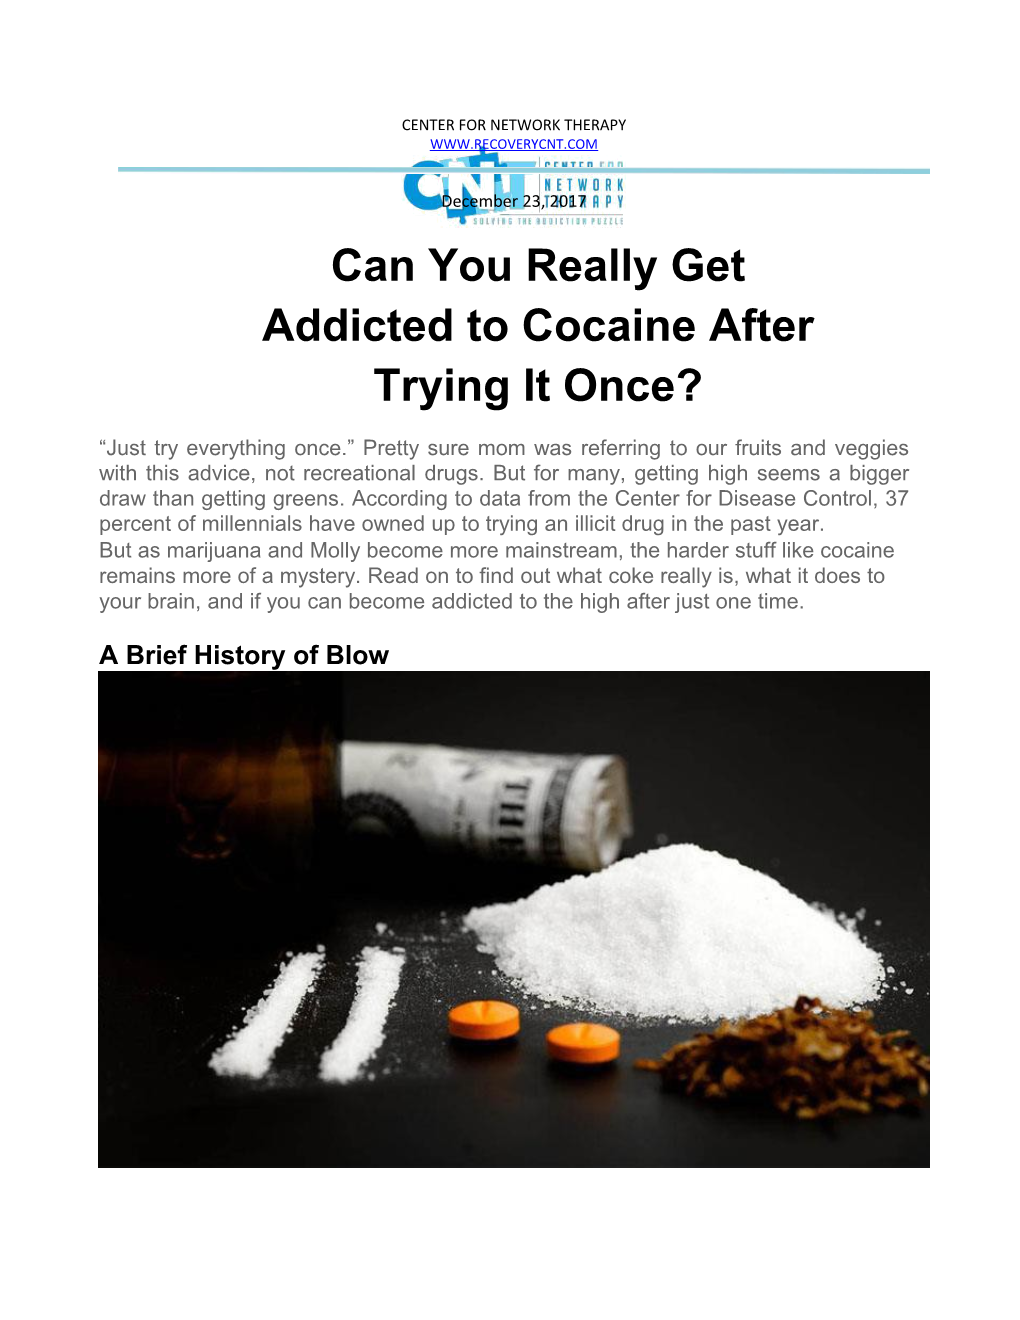 Can You Really Get Addicted to Cocaine After Trying It Once?